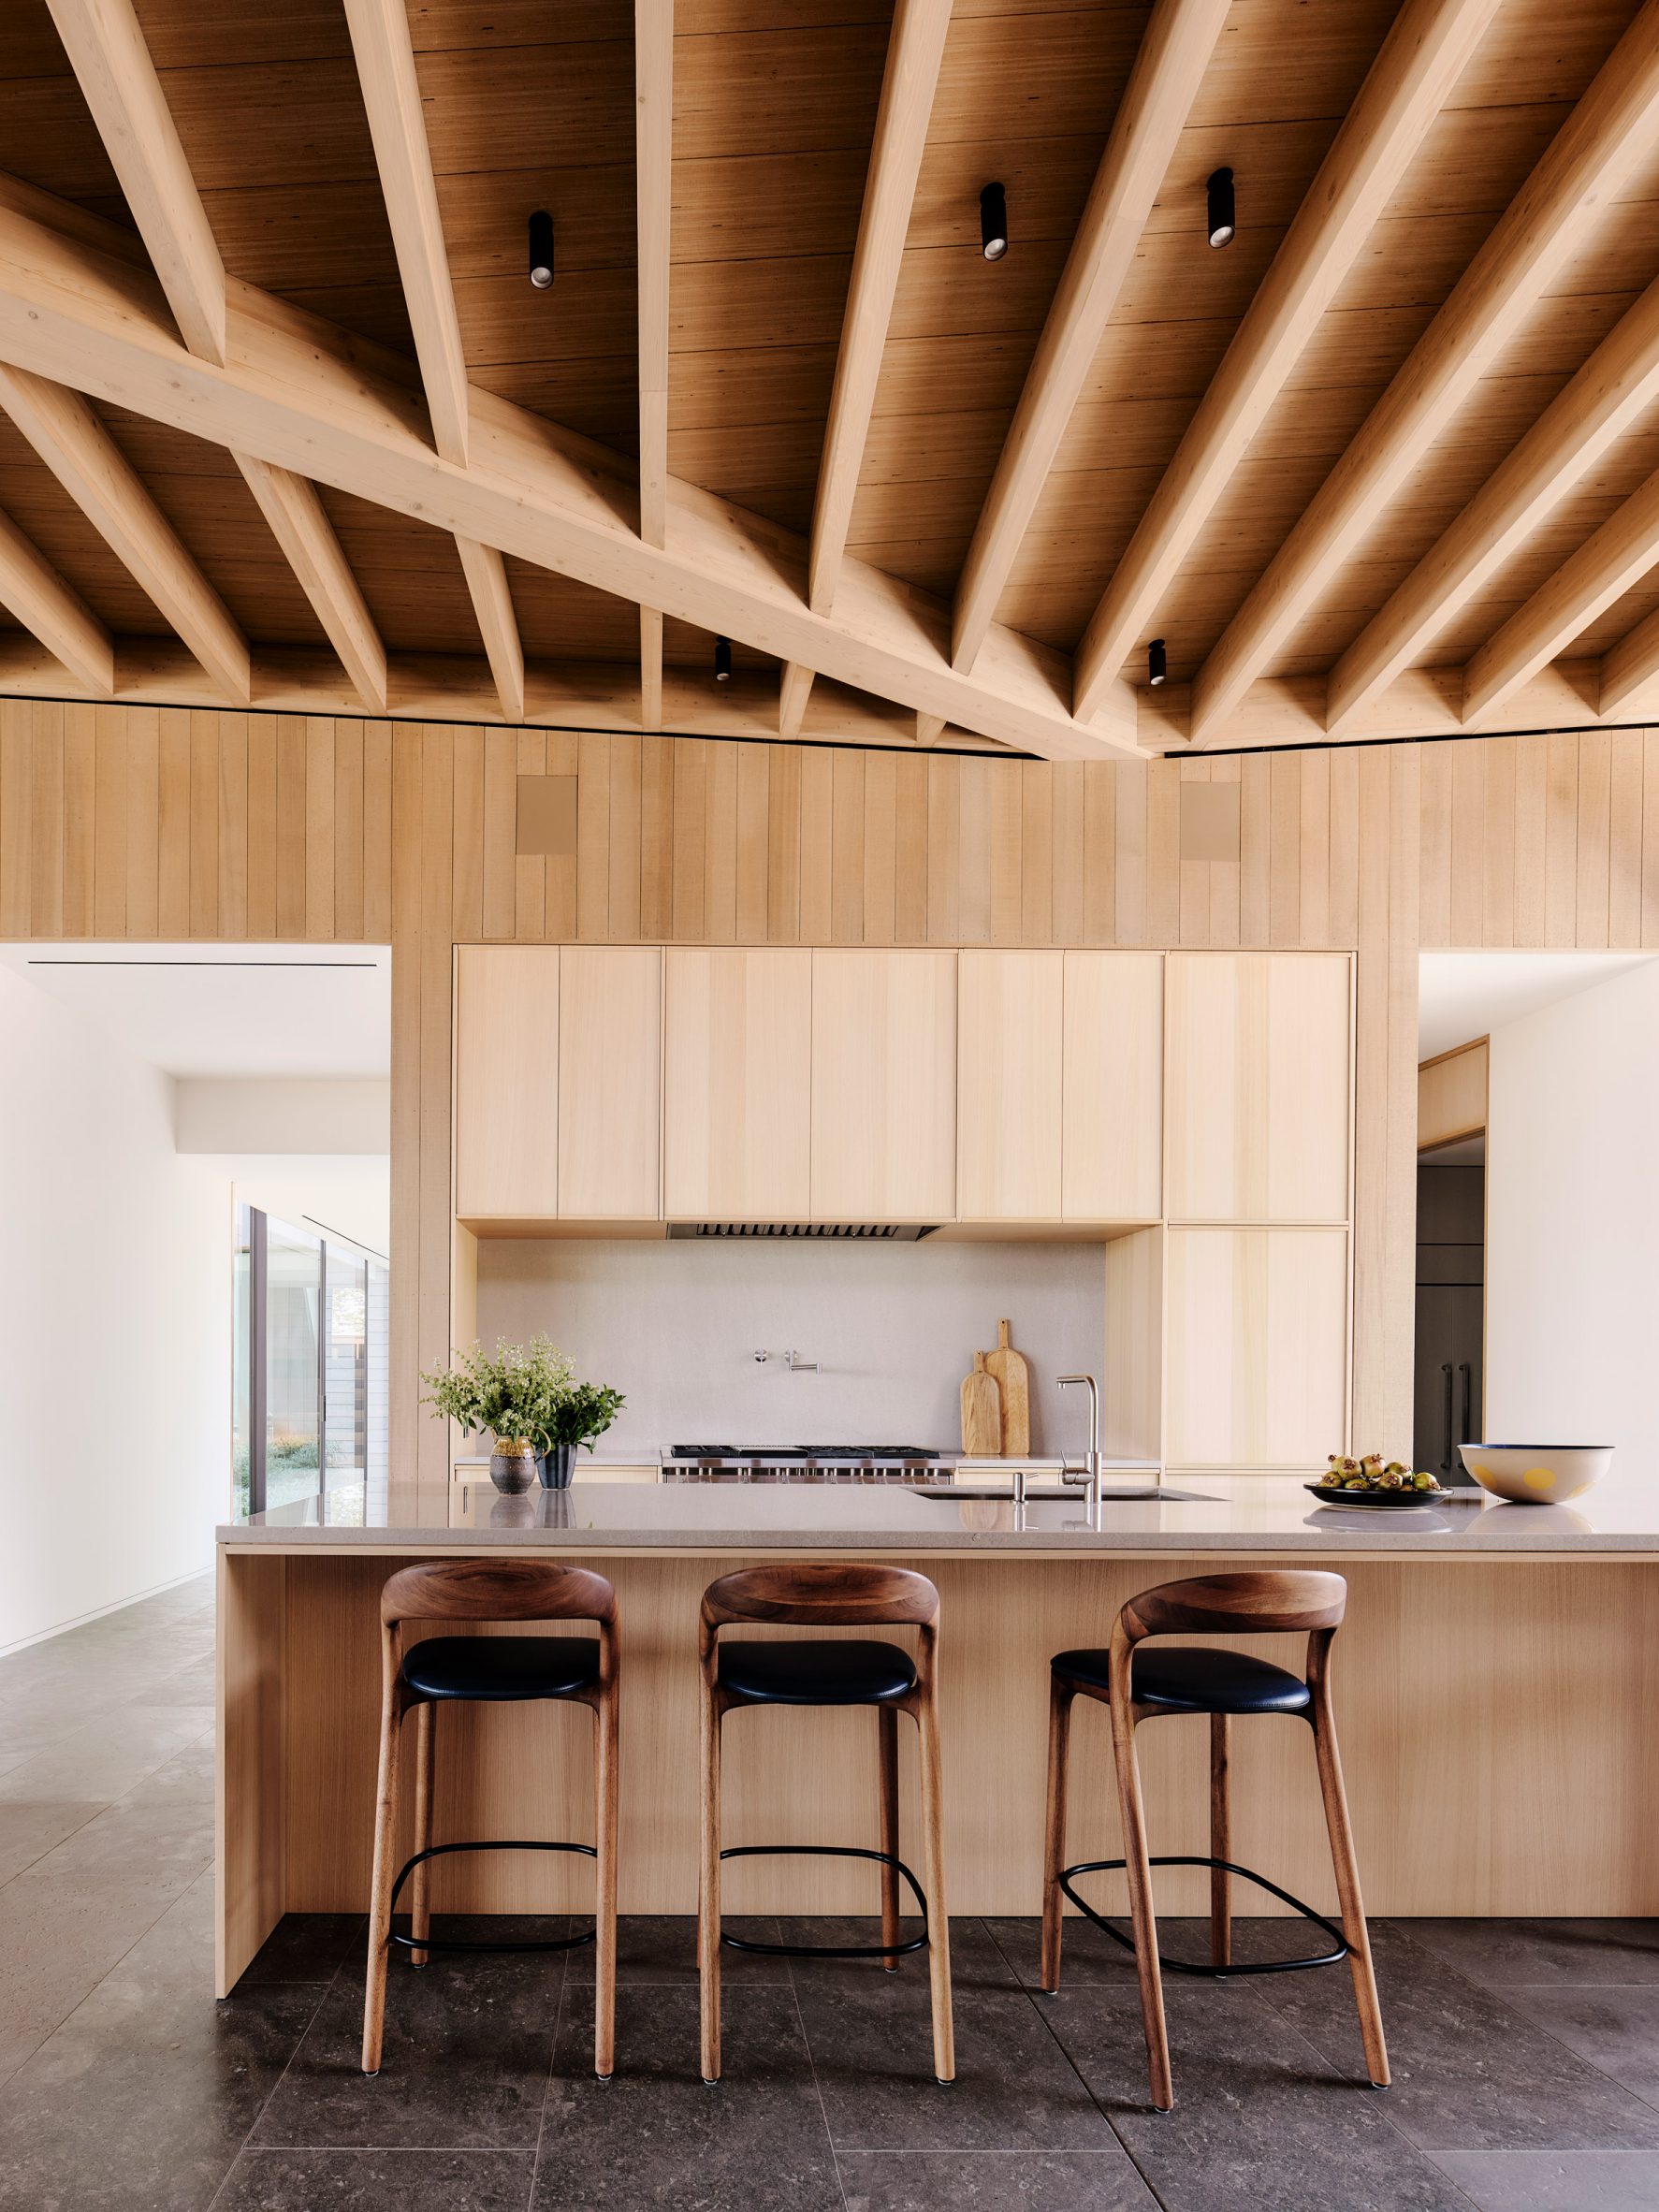 A kitchen with post and beam ceiling